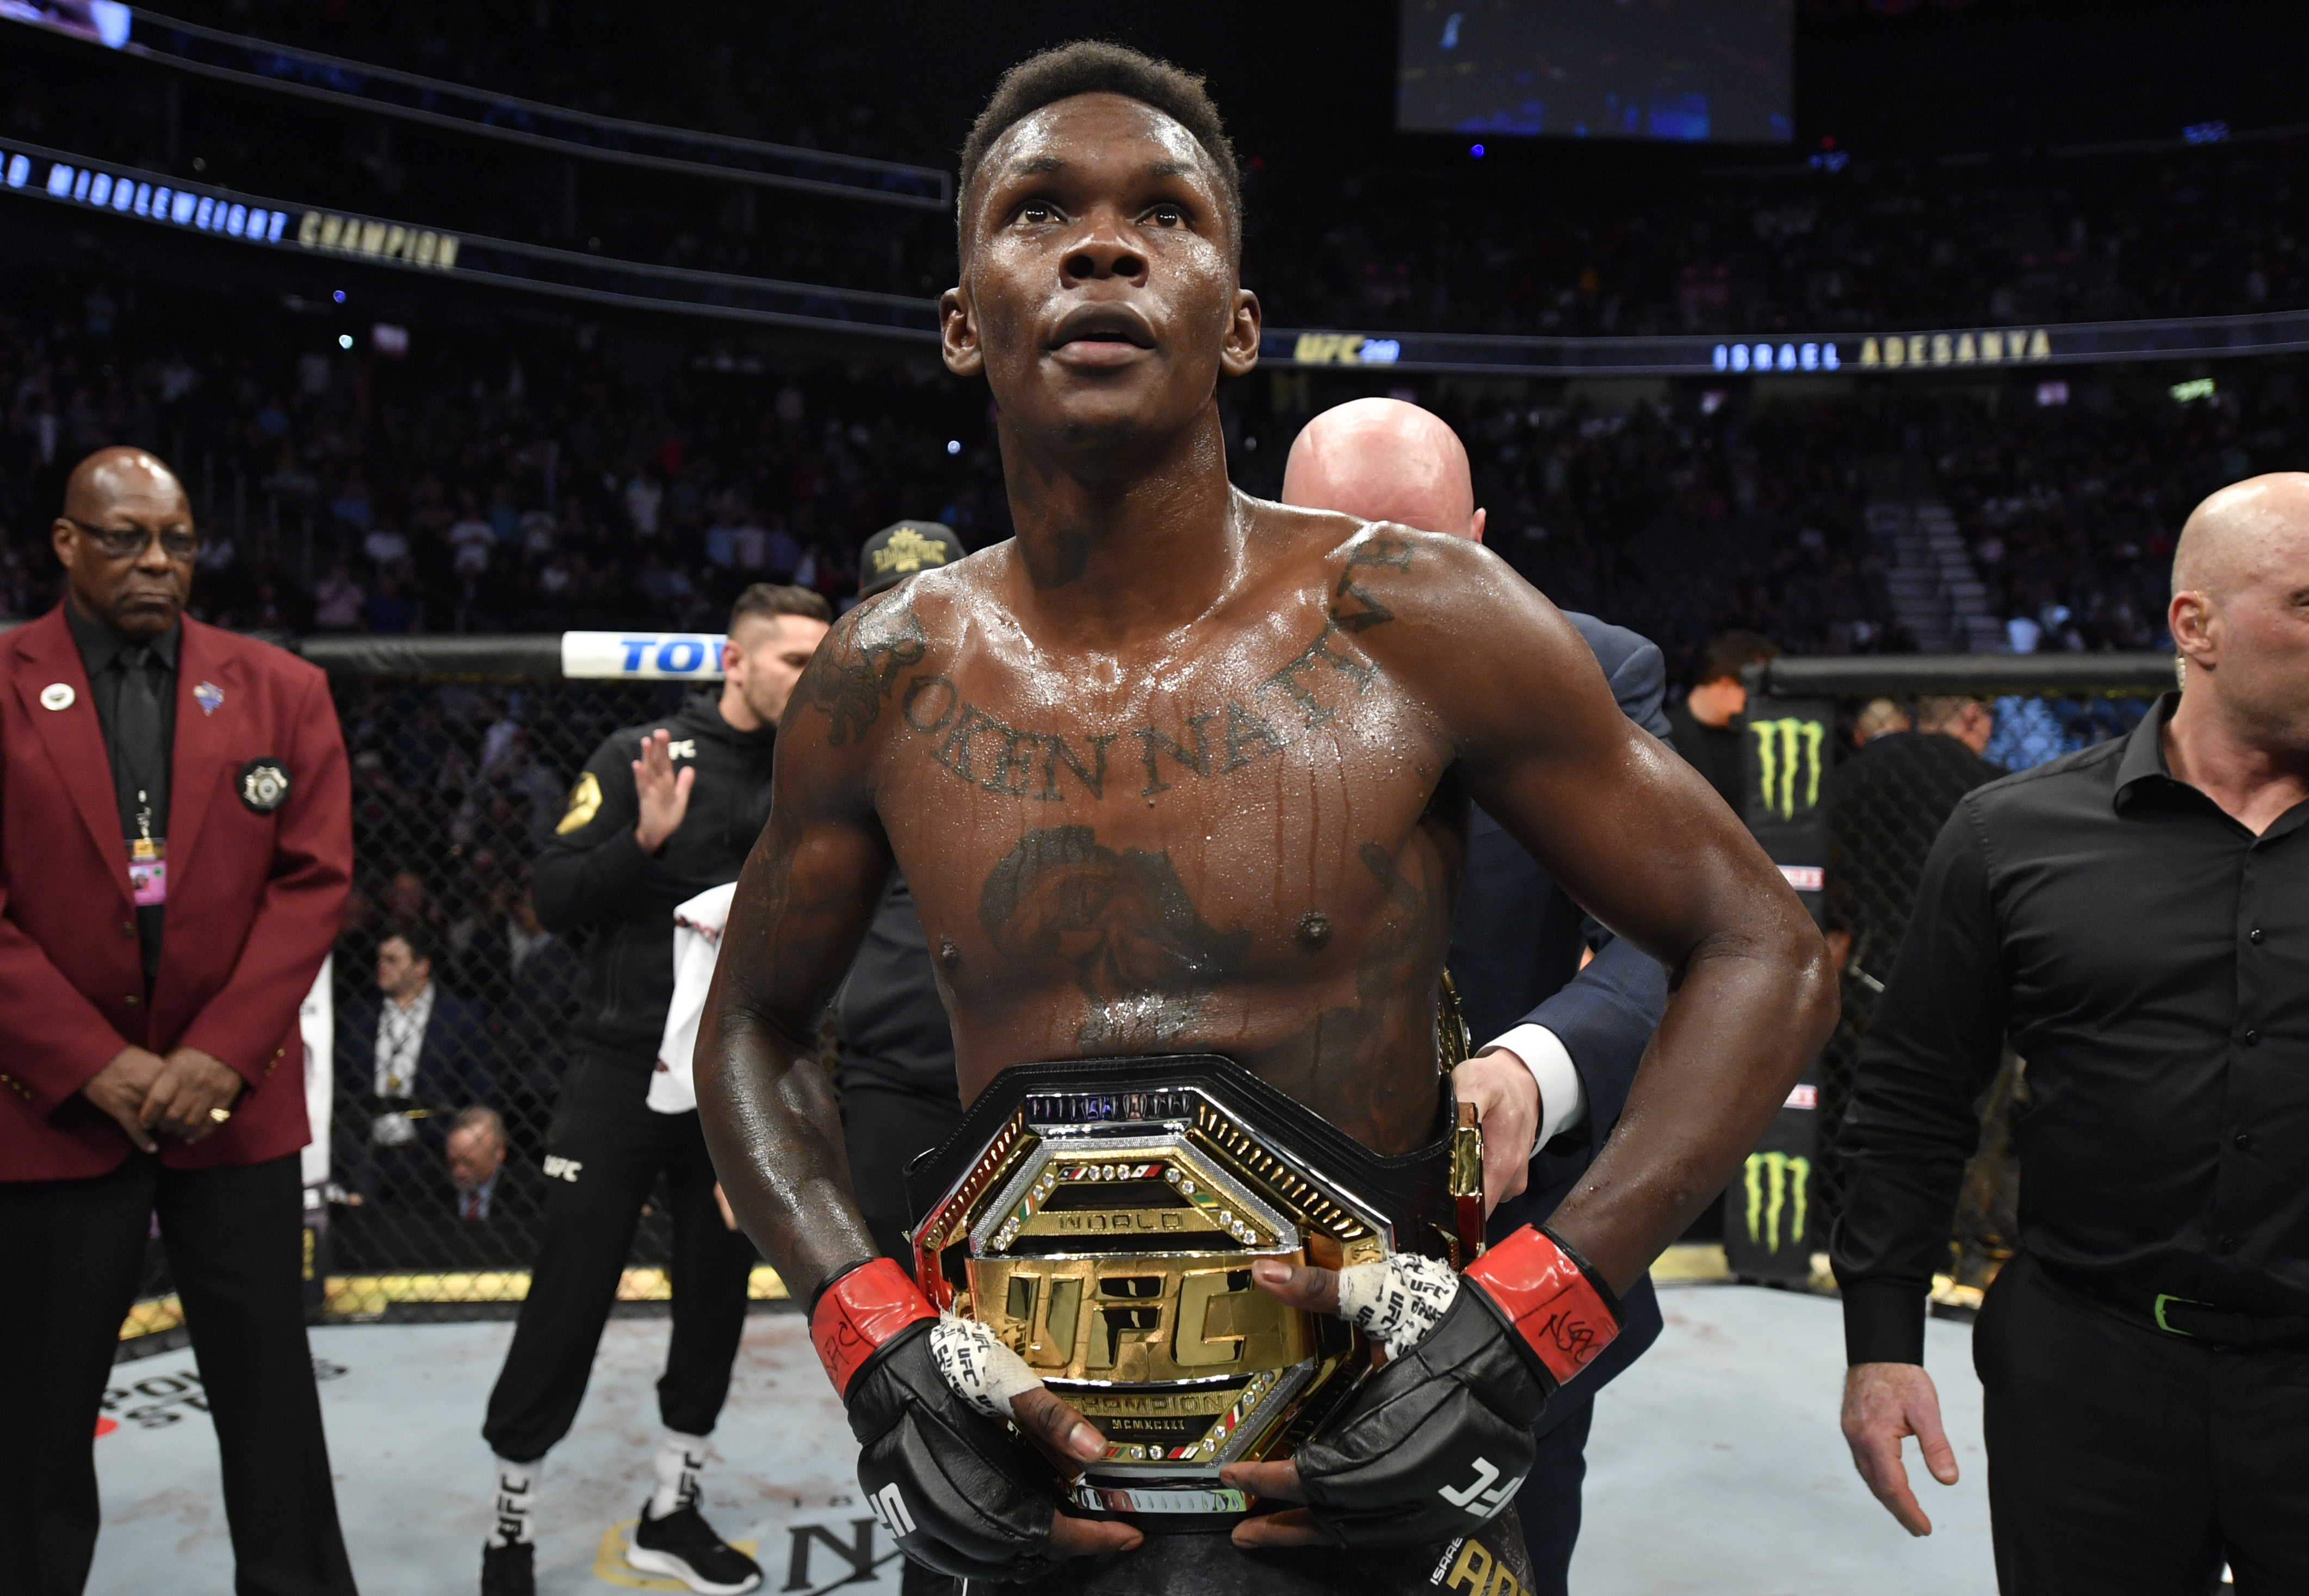 Israel Adesanya celebrates after defeating Yoel Romero in their UFC middleweight championship fight during UFC 248